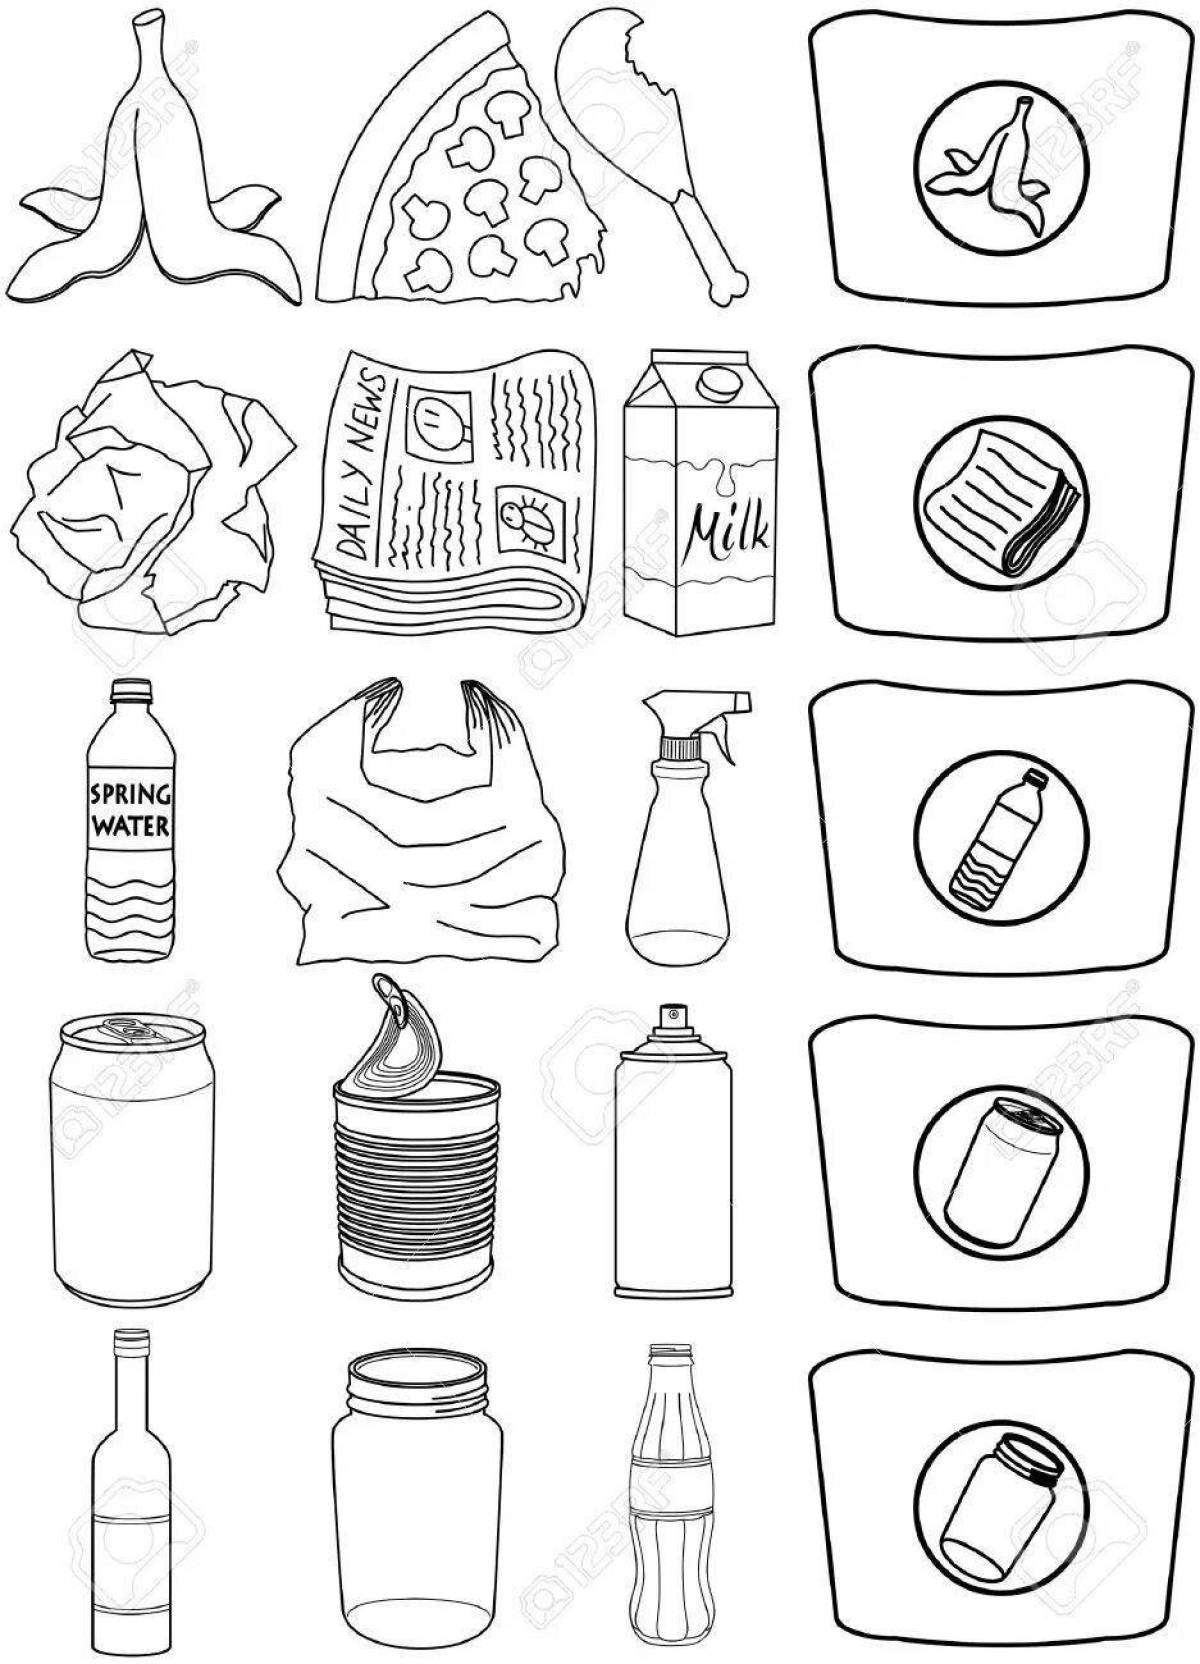 Colorful waste sorting coloring page for kids